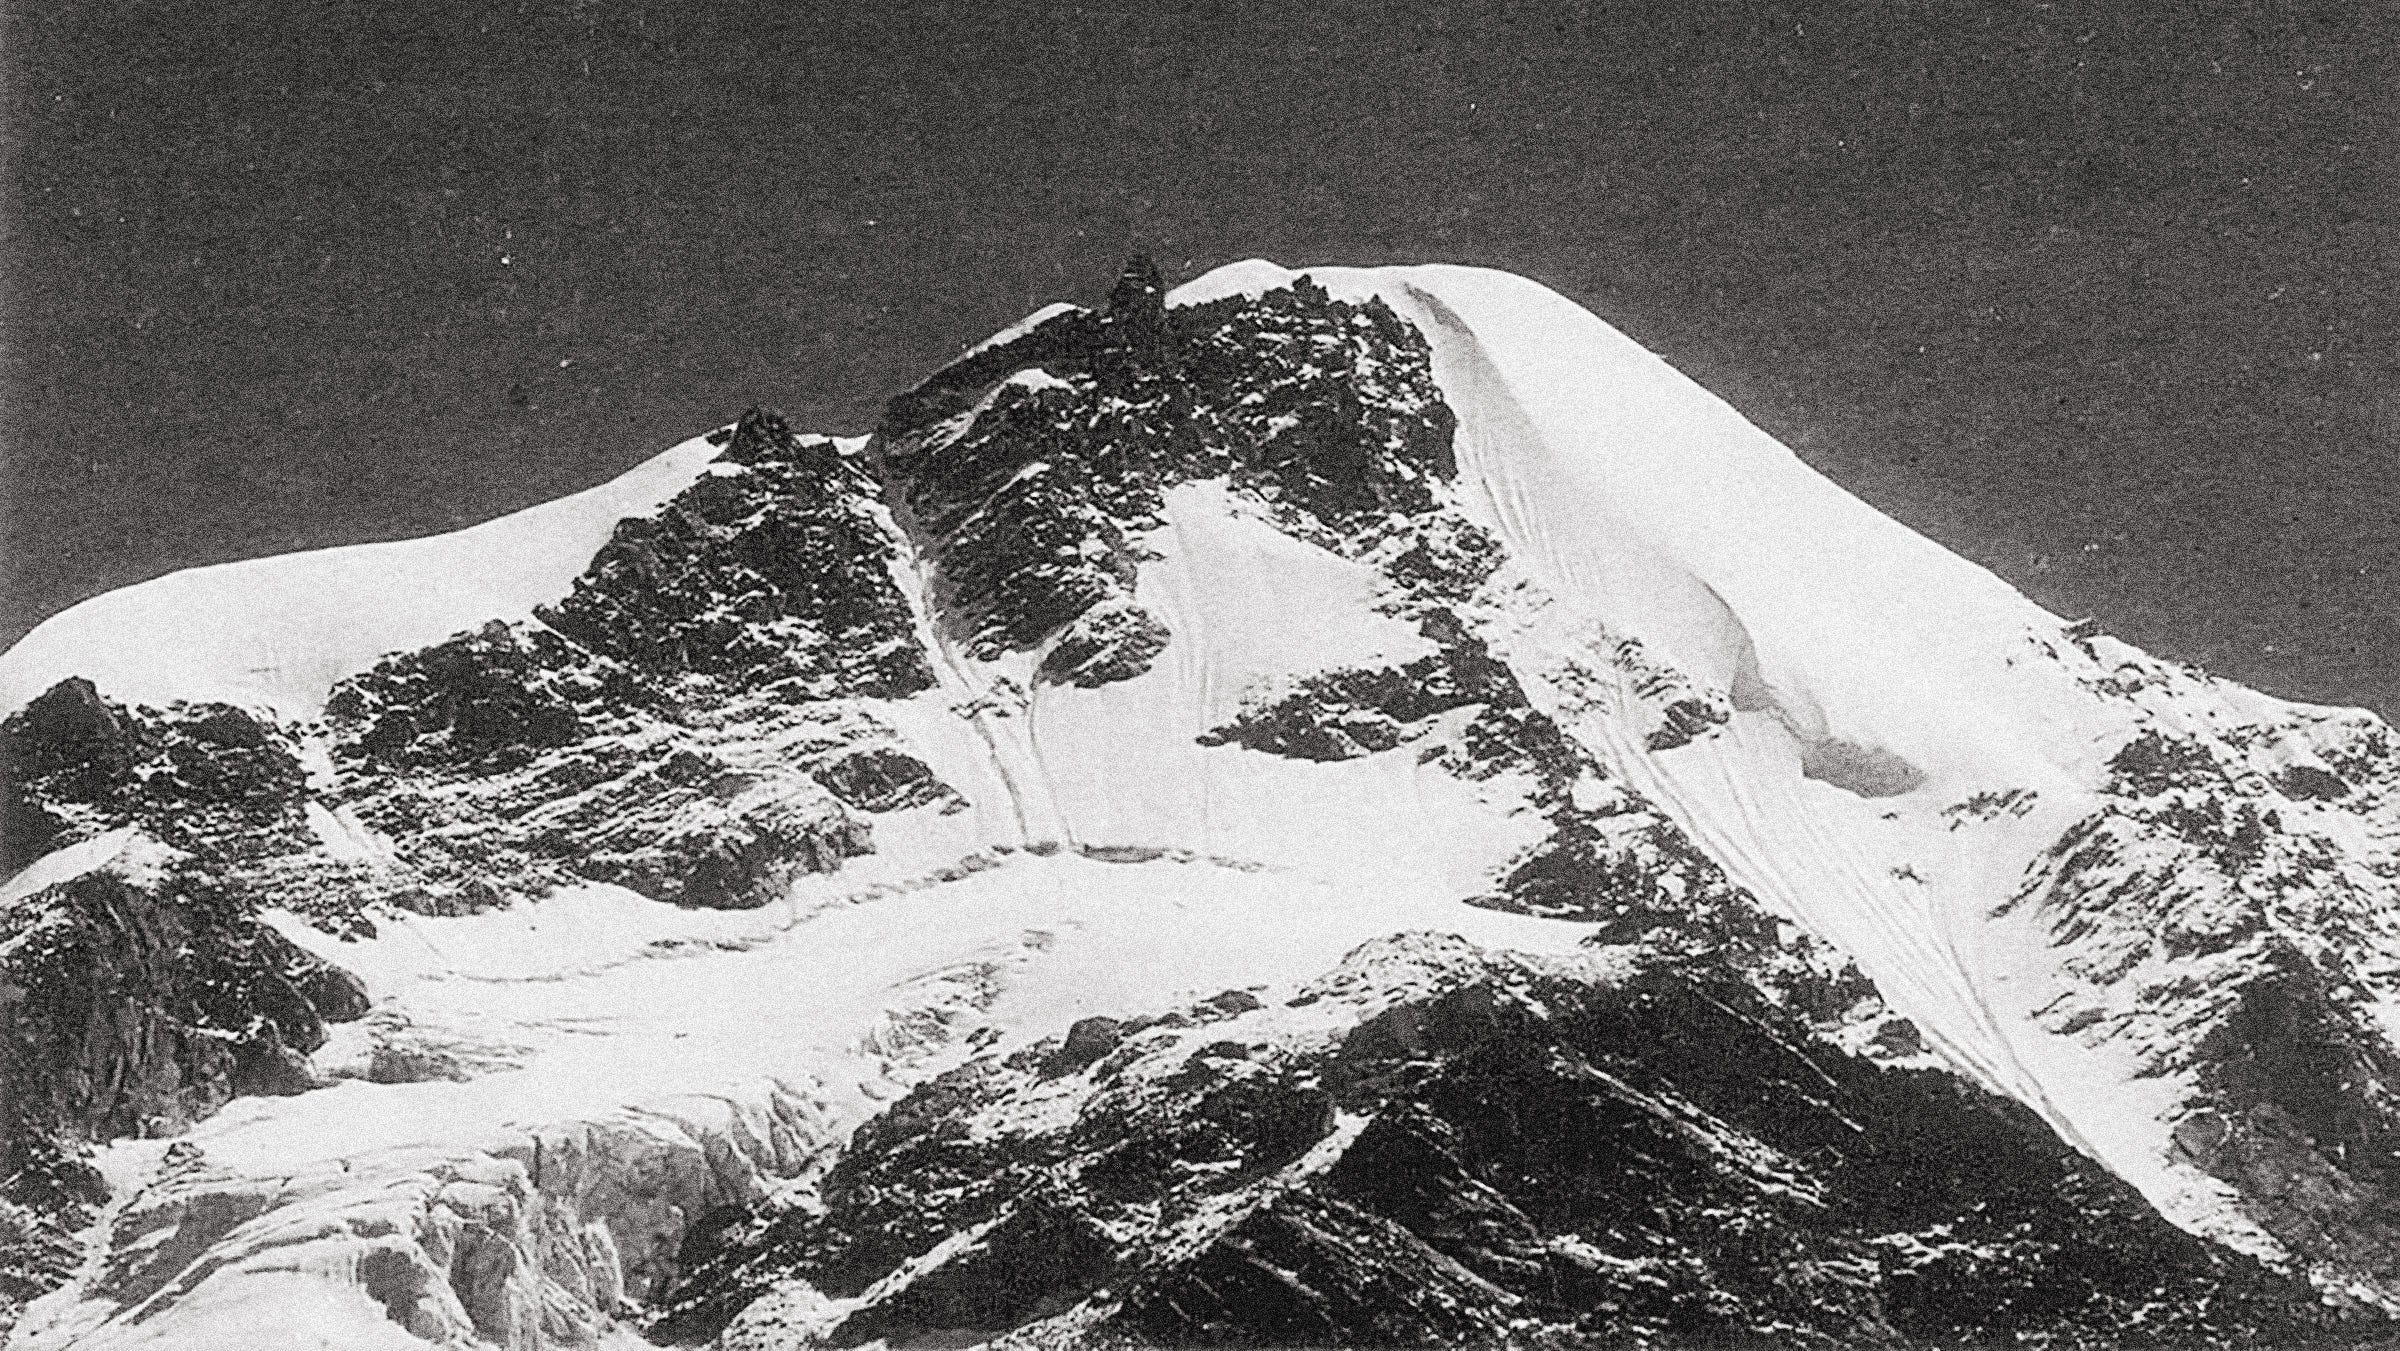 29 People Died in One of the Worst Mountaineering Accidents in